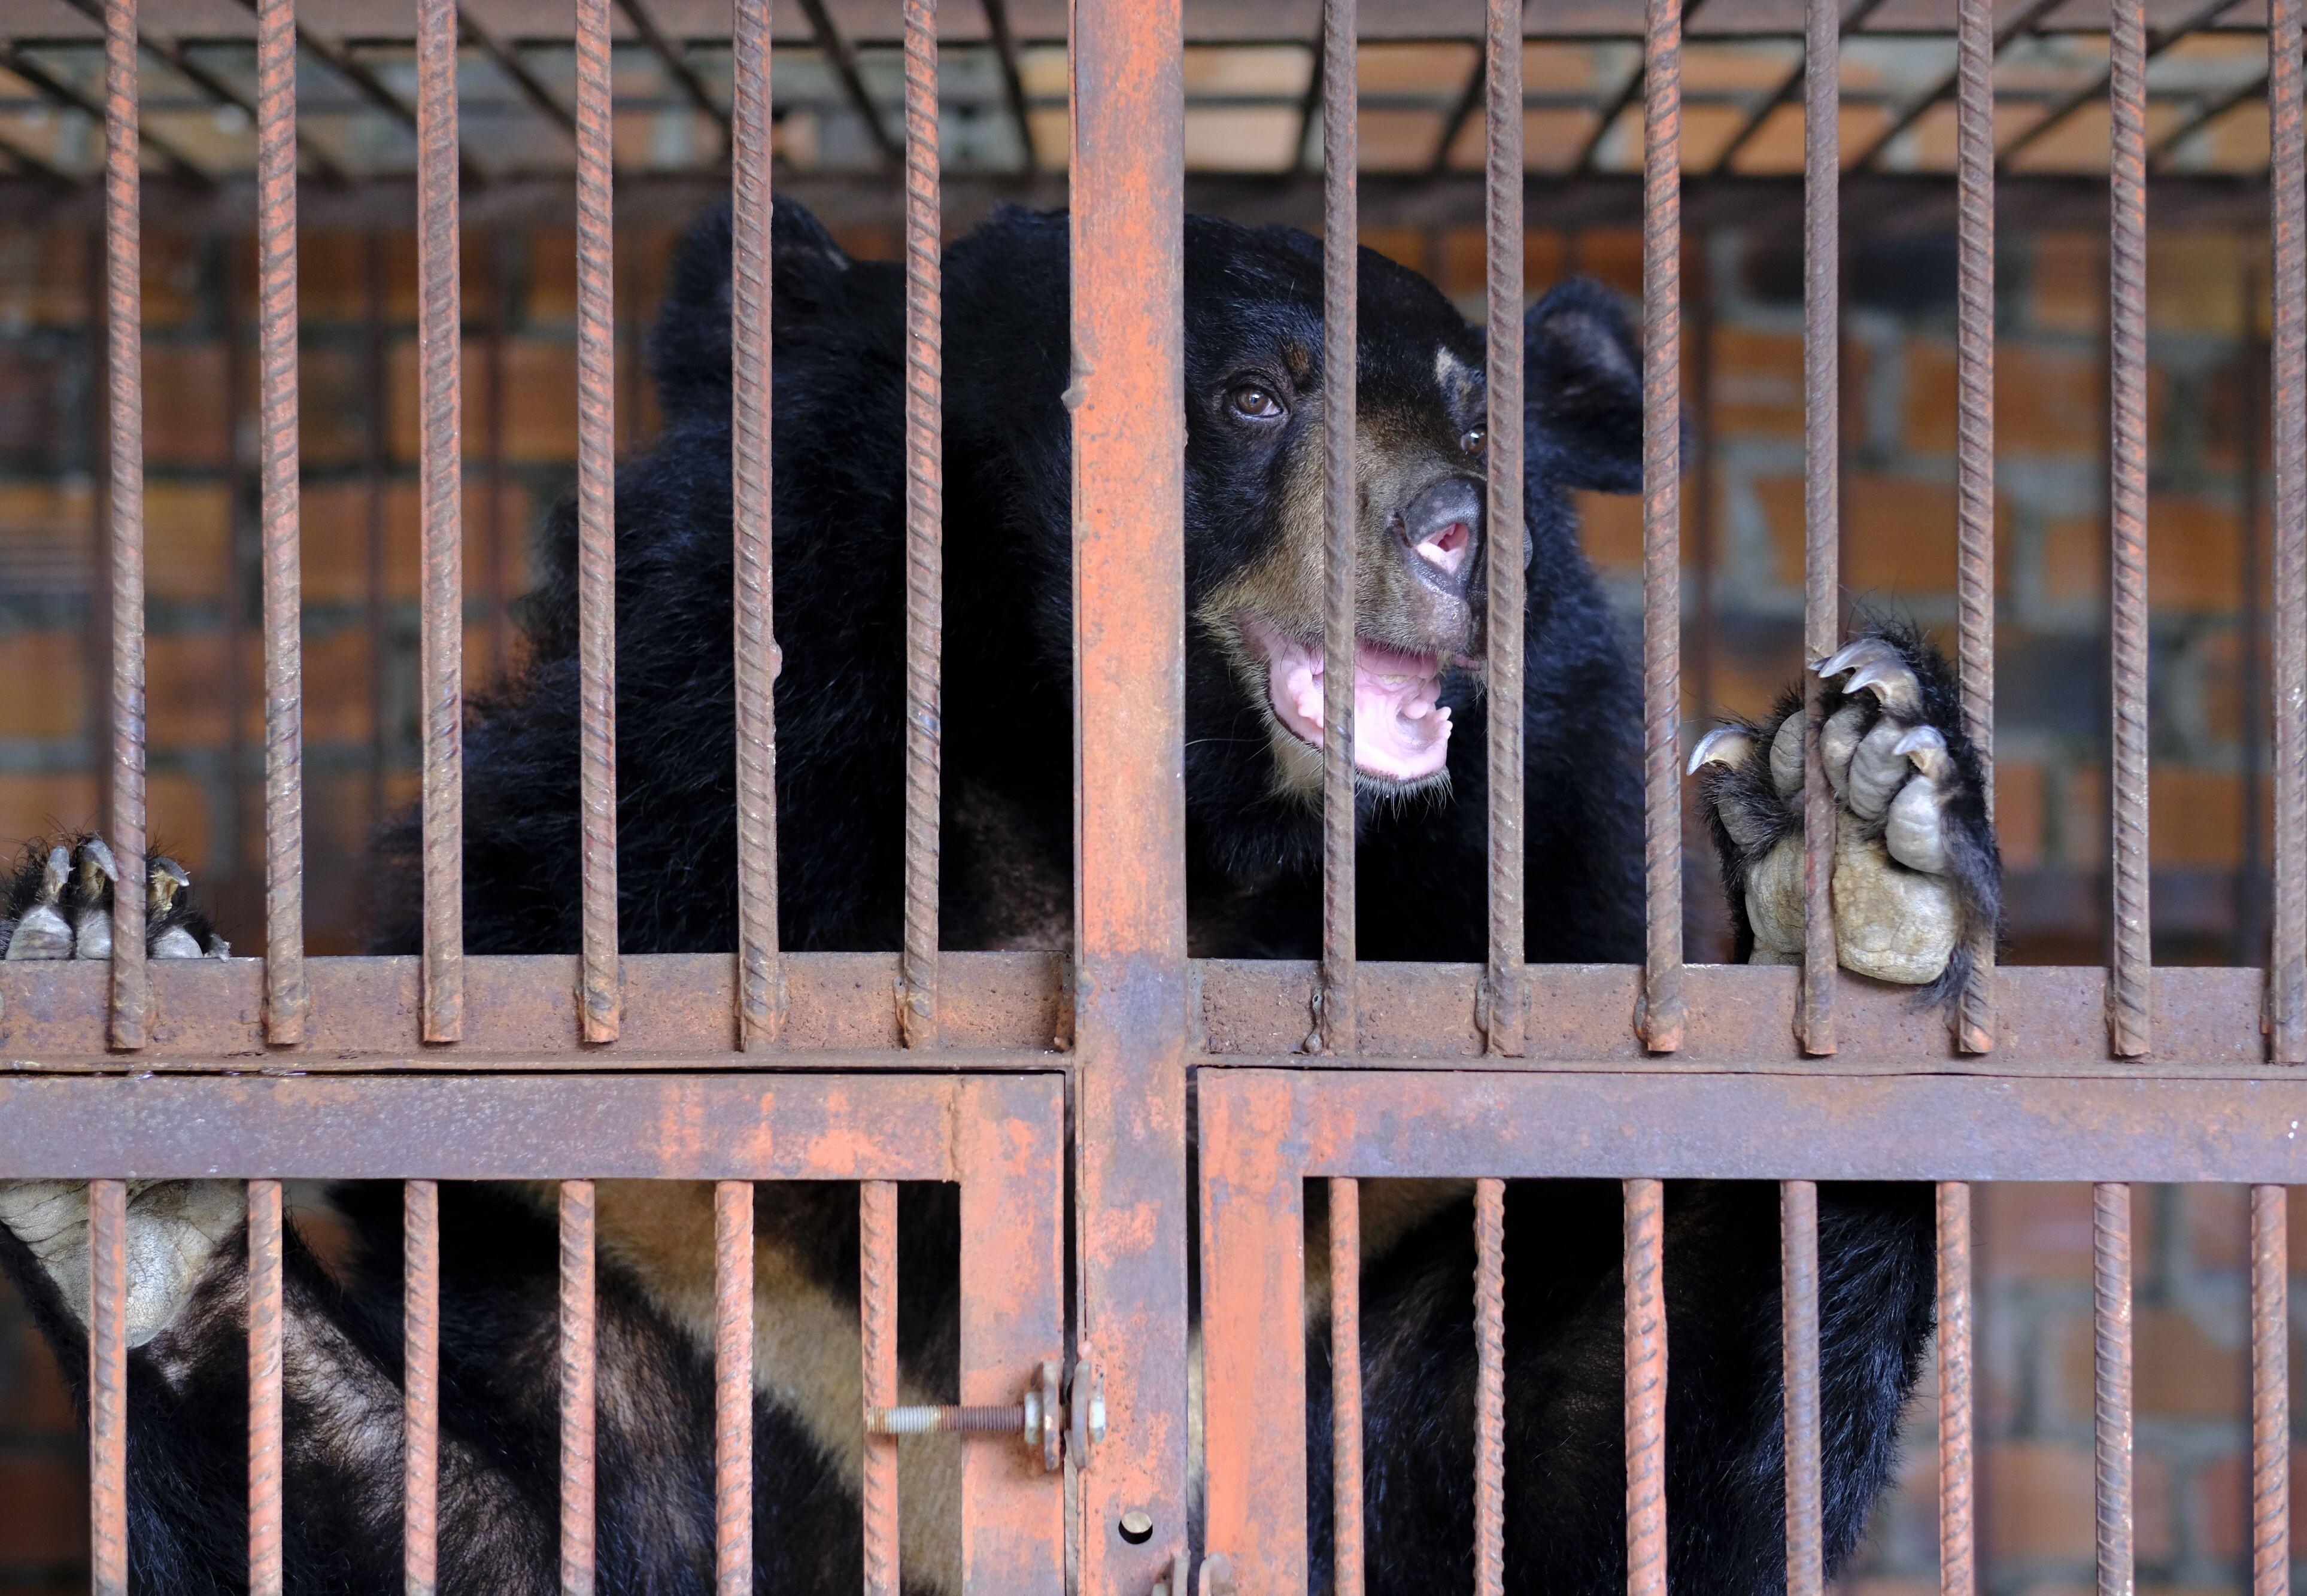 Biggest FOUR PAWS mission in Vietnam: Seven bile bears rescued from cruel  captivity - #SaddestBears - a FOUR PAWS campaign to help bears